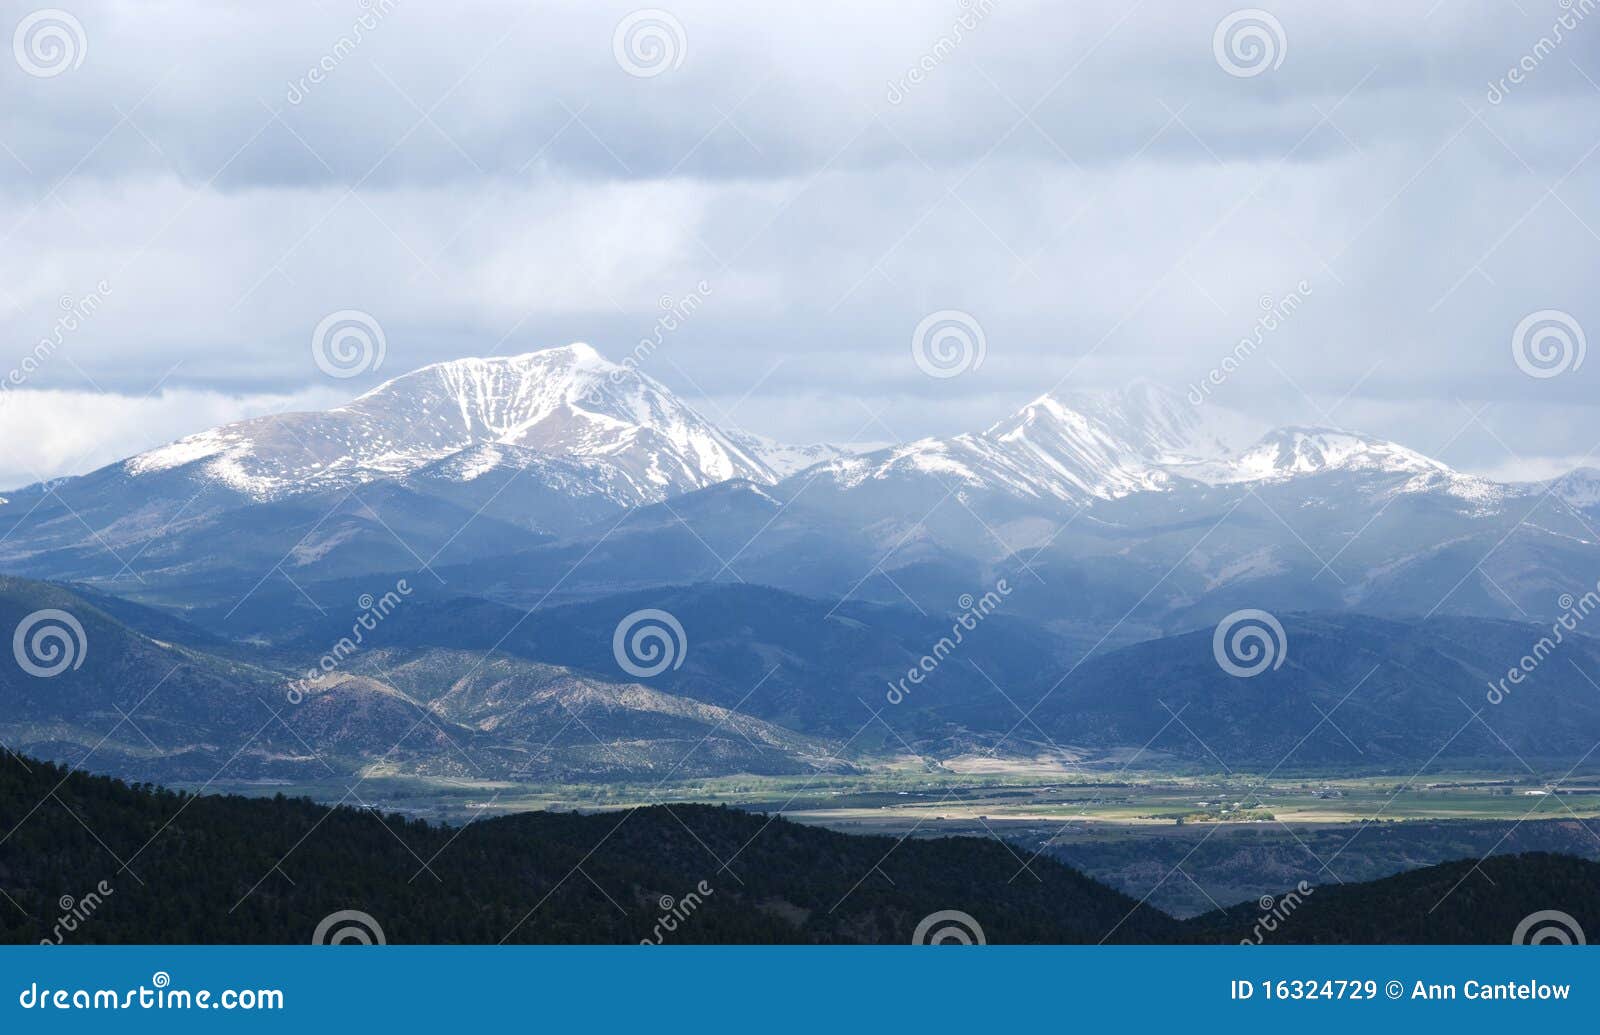 snow capped mountains shrouded in storm clouds